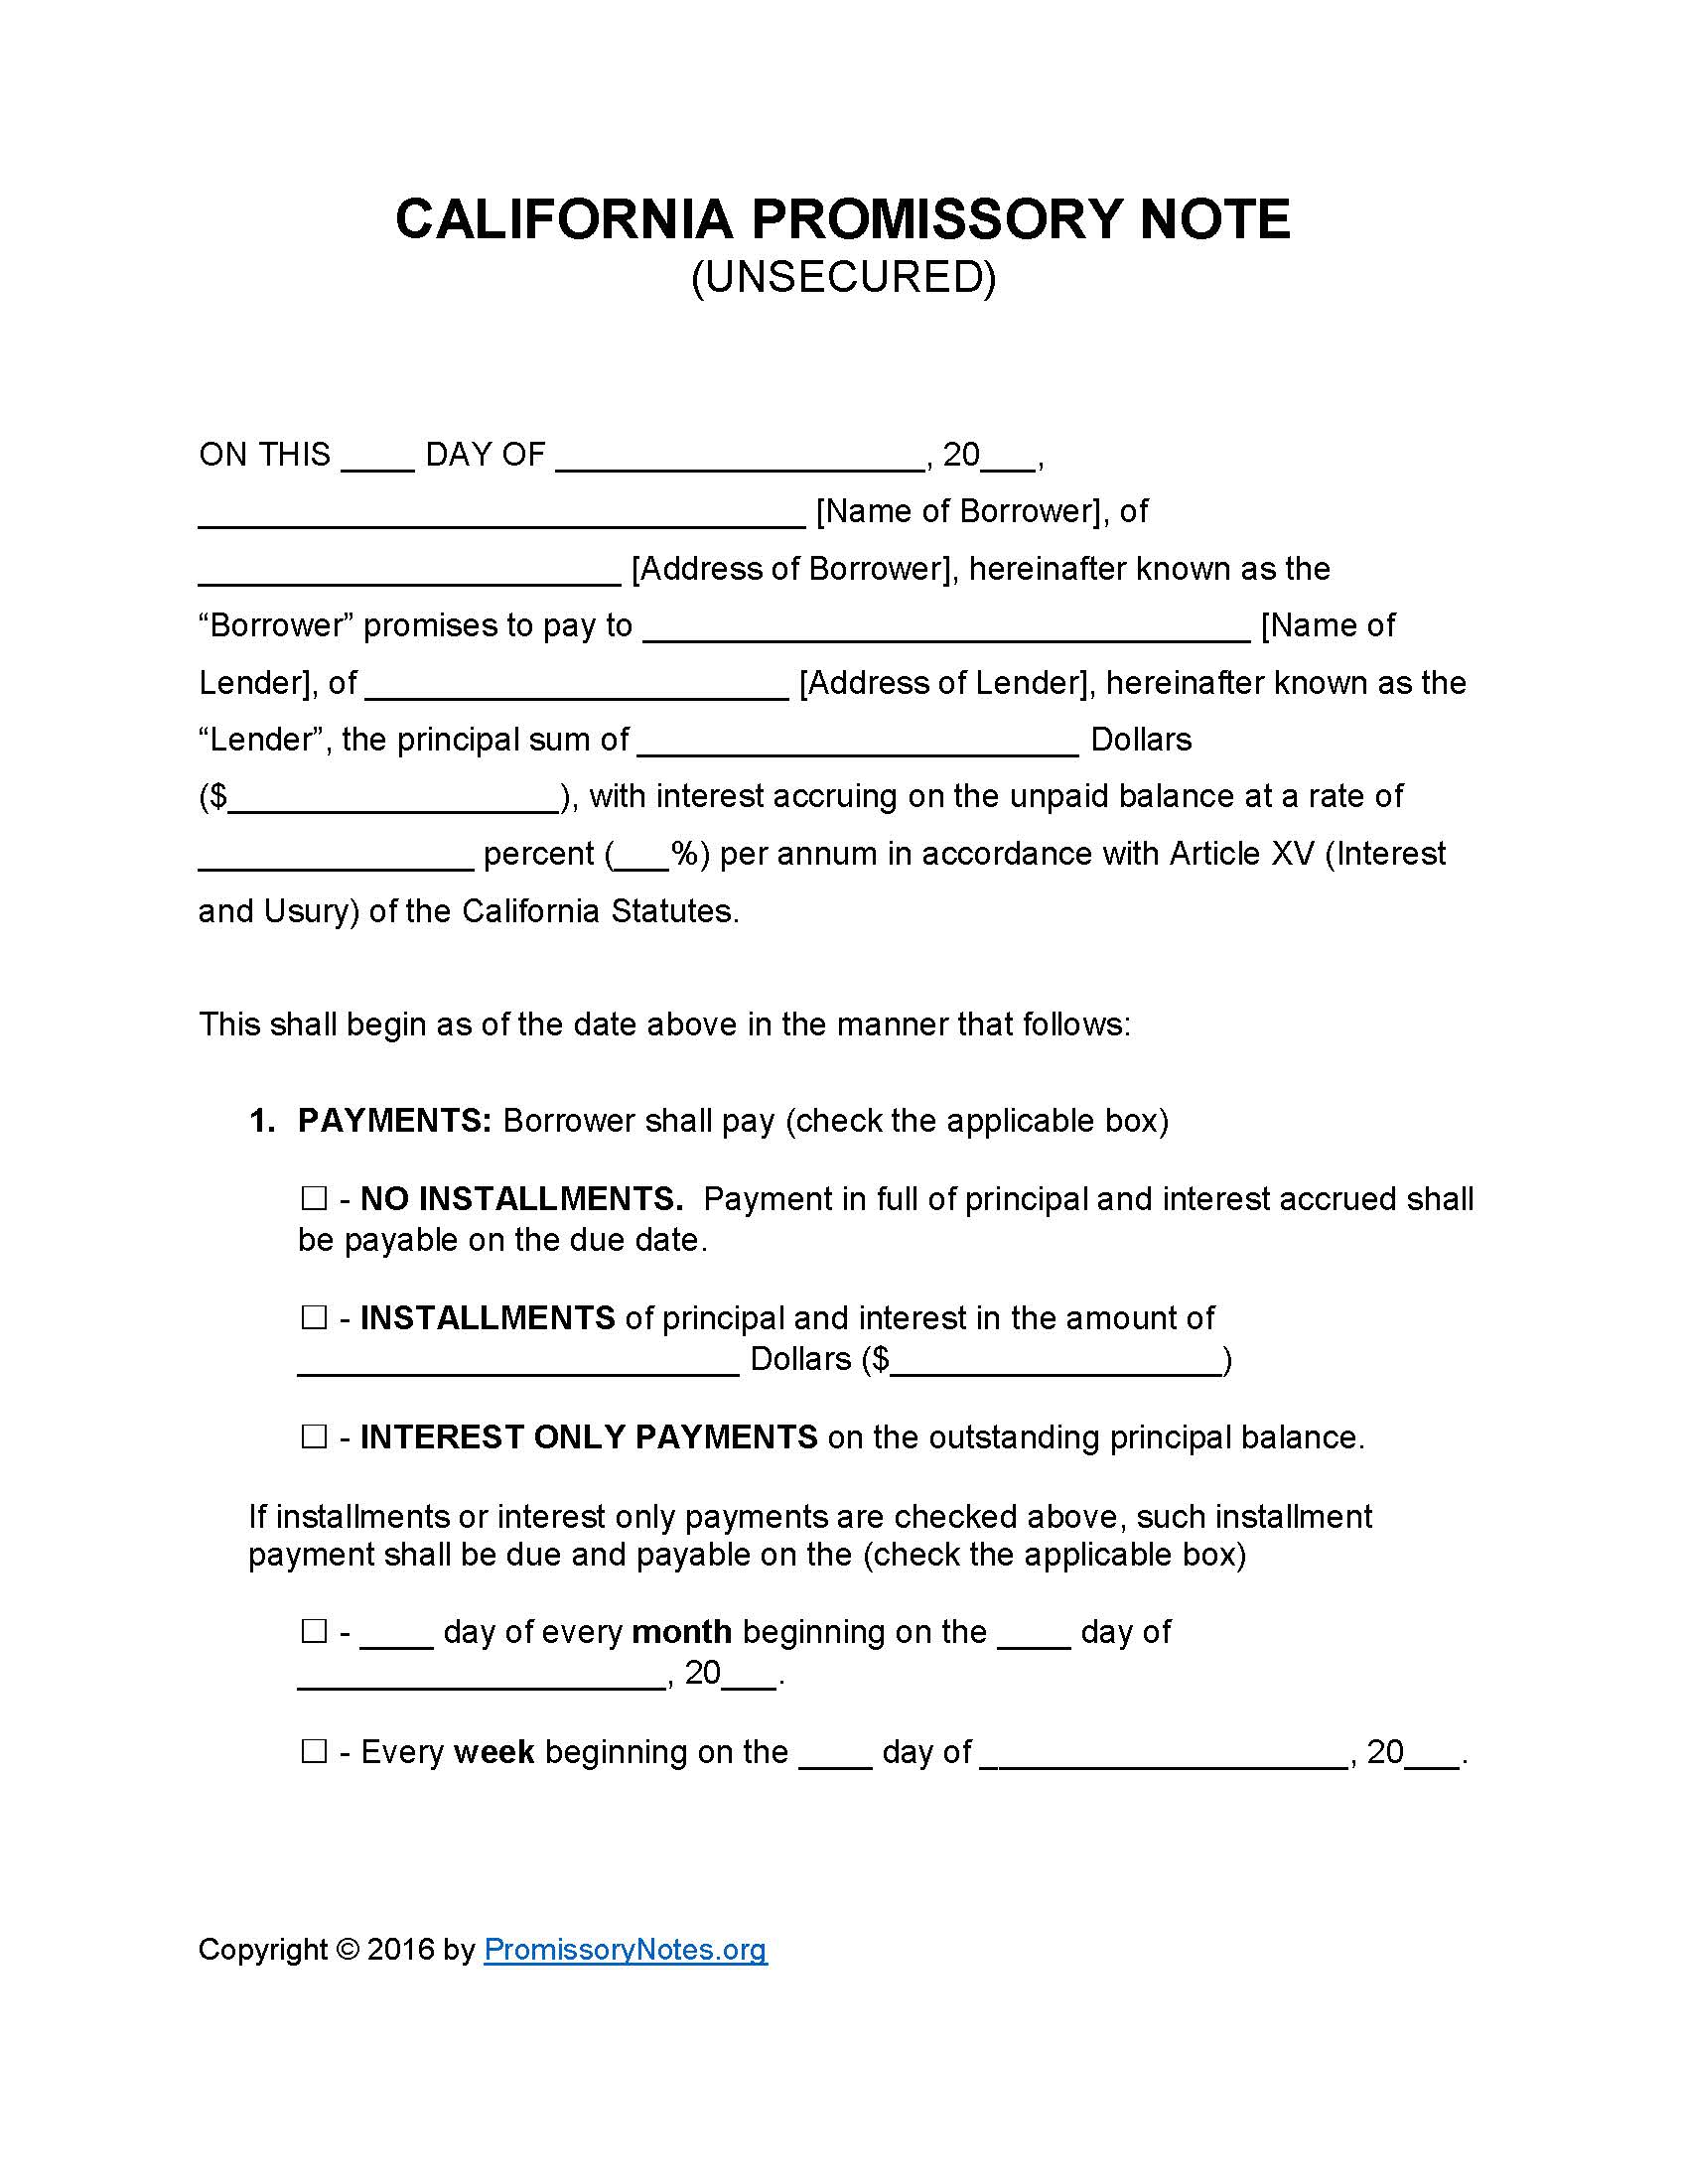 California Unsecured Promissory Note Template - Promissory Notes Inside Simple Promissory Note Template